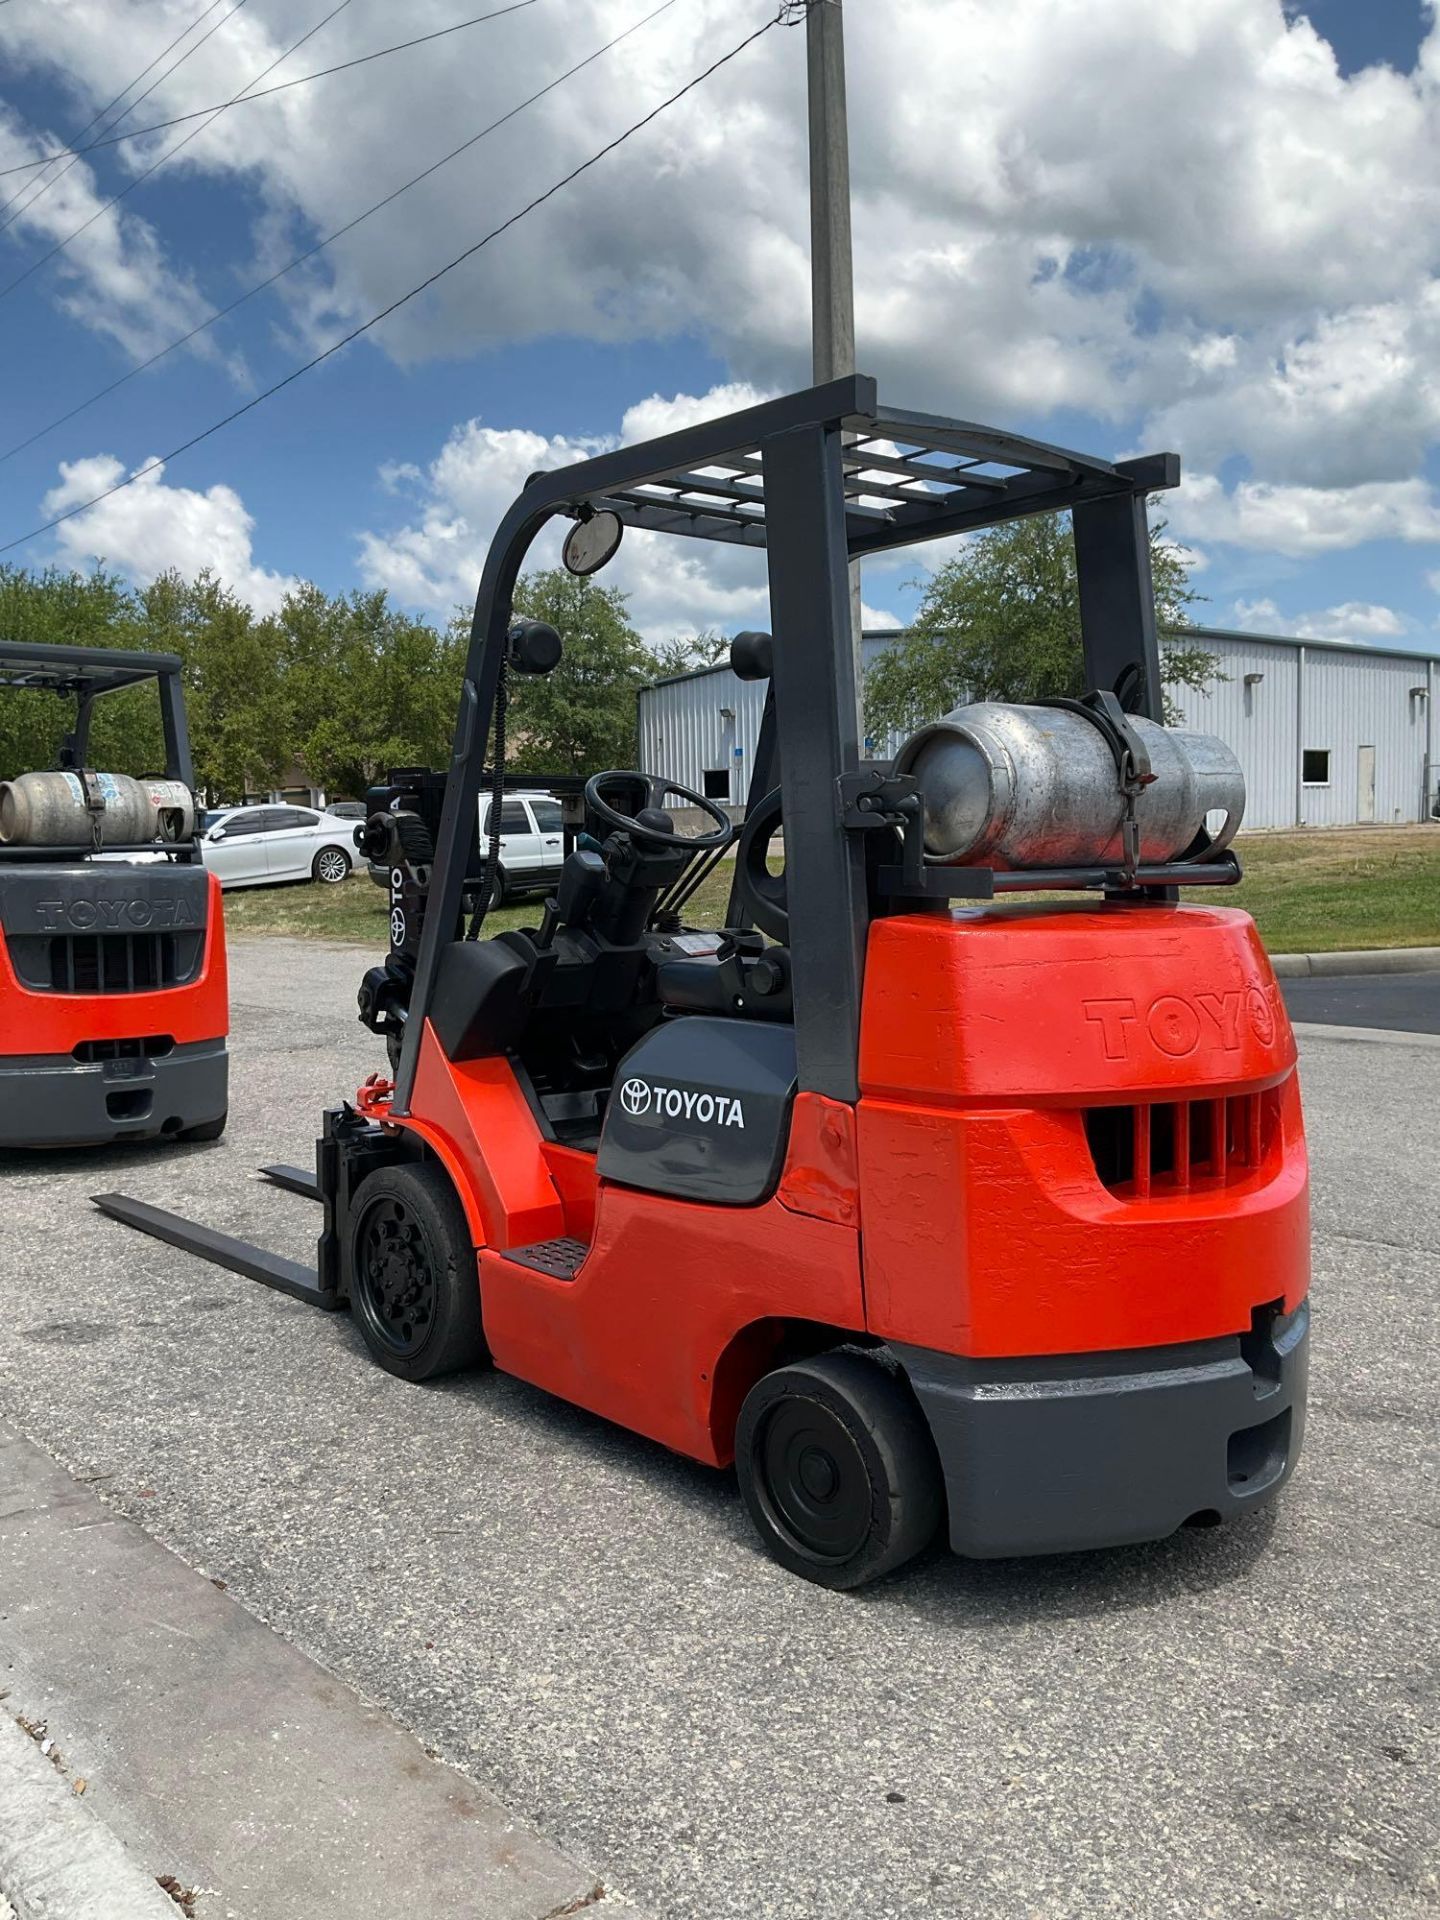 TOYOTA FORKLIFT MODEL 7FGCU25, LP POWERED, APPROX MAX CAPACITY 4700, MAX HEIGHT 80in, TILT, SIDE - Image 3 of 14